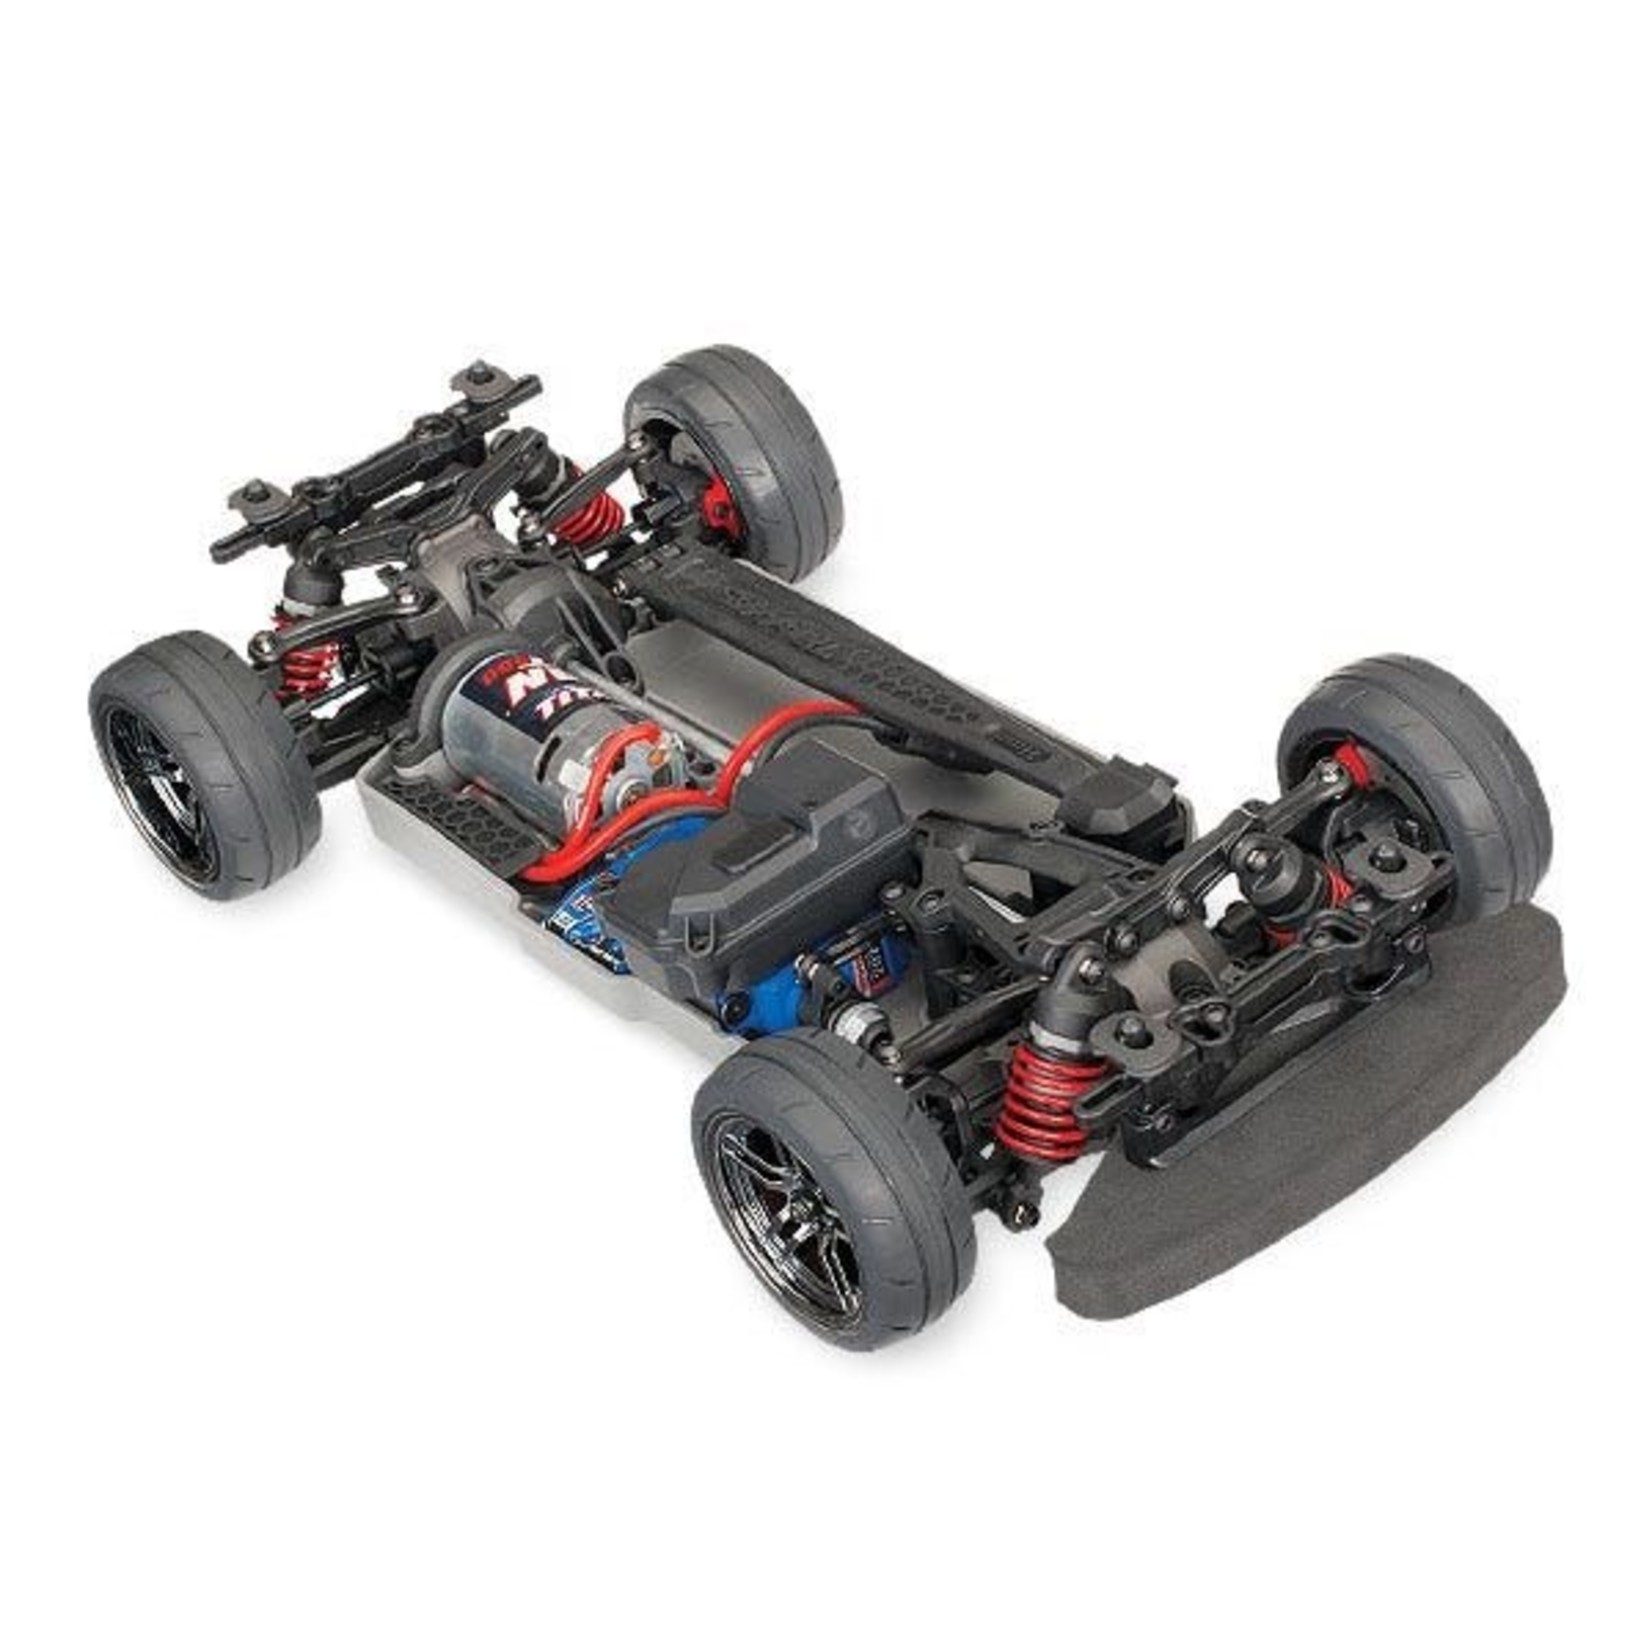 Traxxas 83024-4-R5 - 4-Tec 2.0: 1/10 Scale AWD Chassis with TQ 2.4GHz Radio System